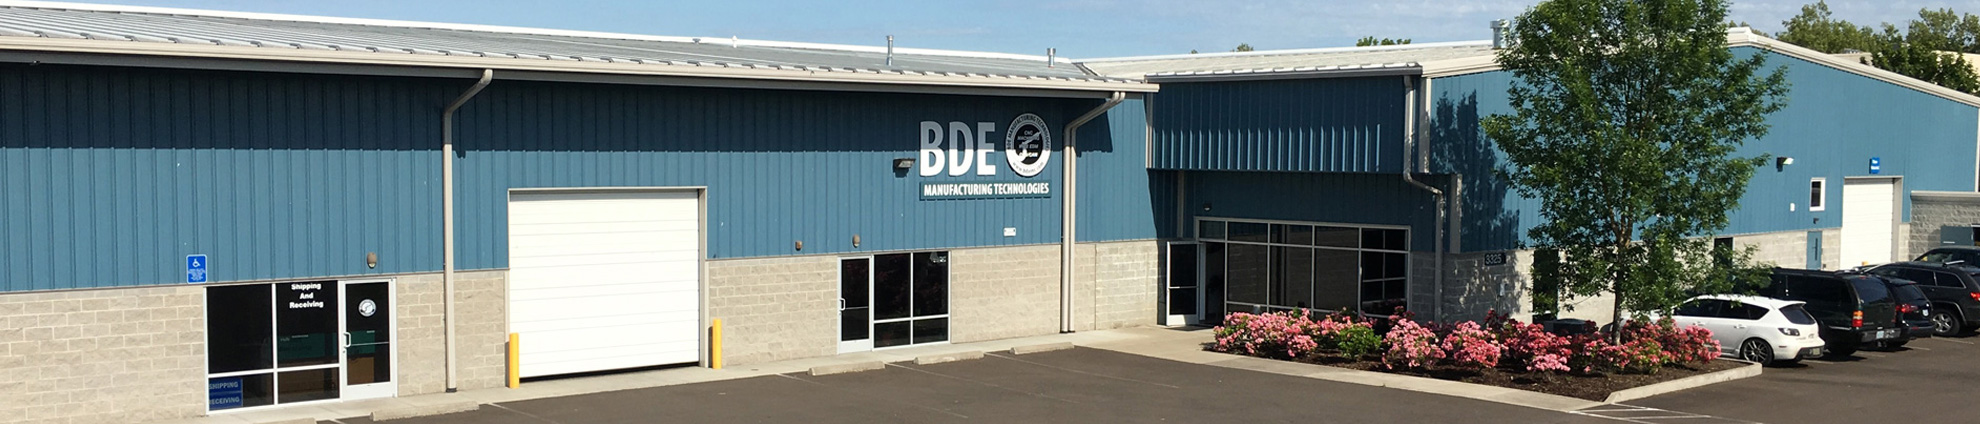 BDE Manufacturing Technologies Company Building